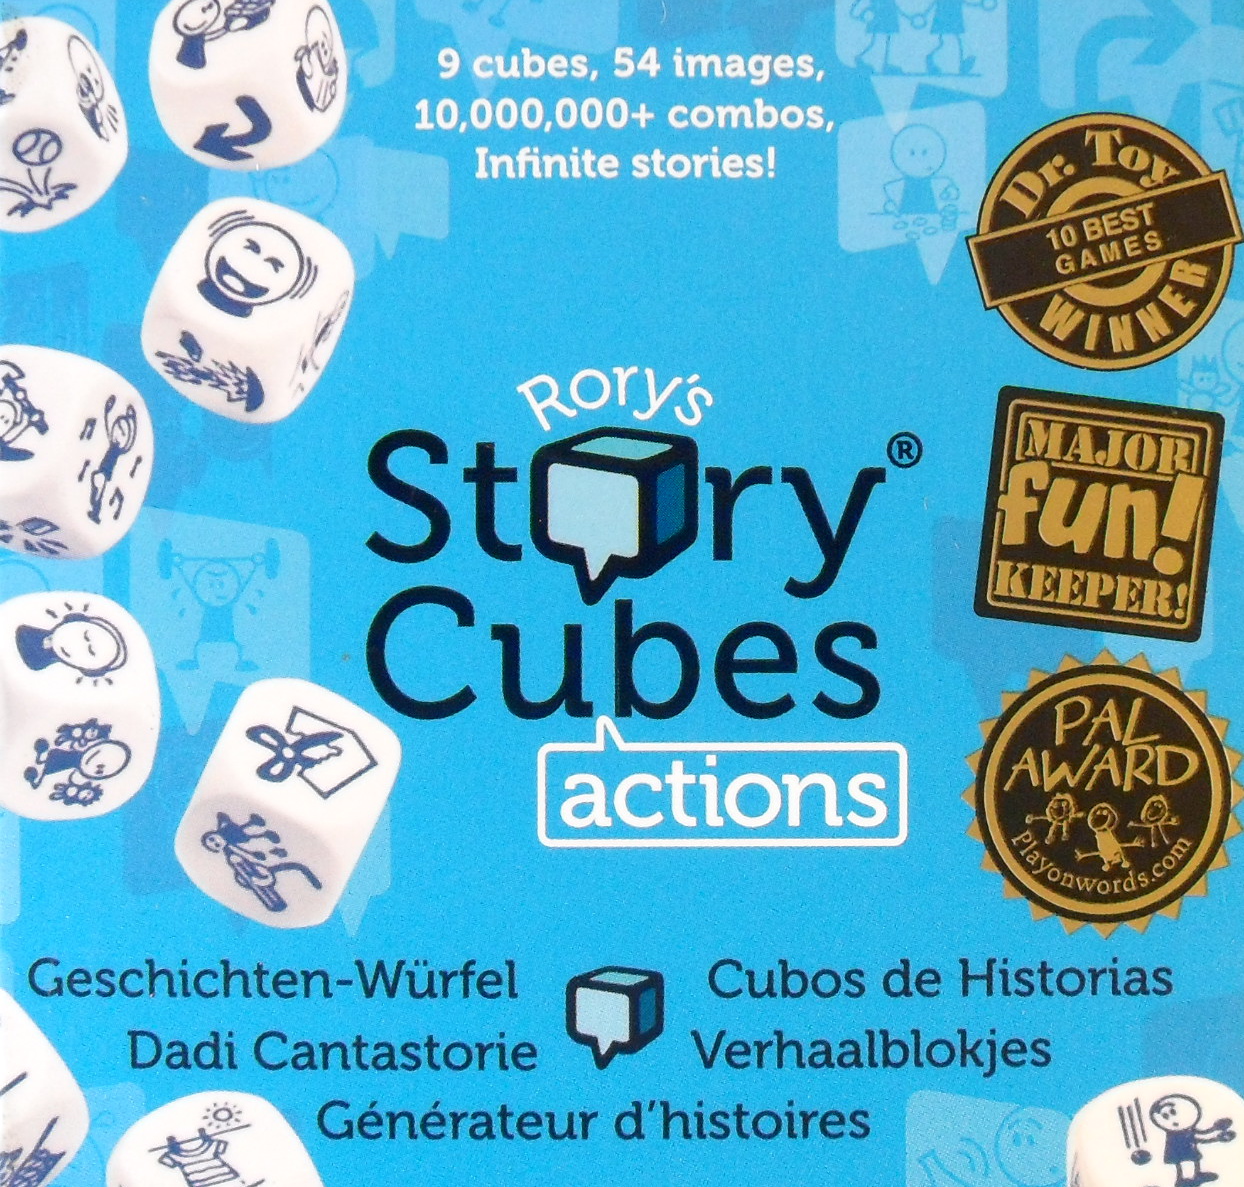 Rory's Story Cubes Actions (Story Cubes Werkwoorden)